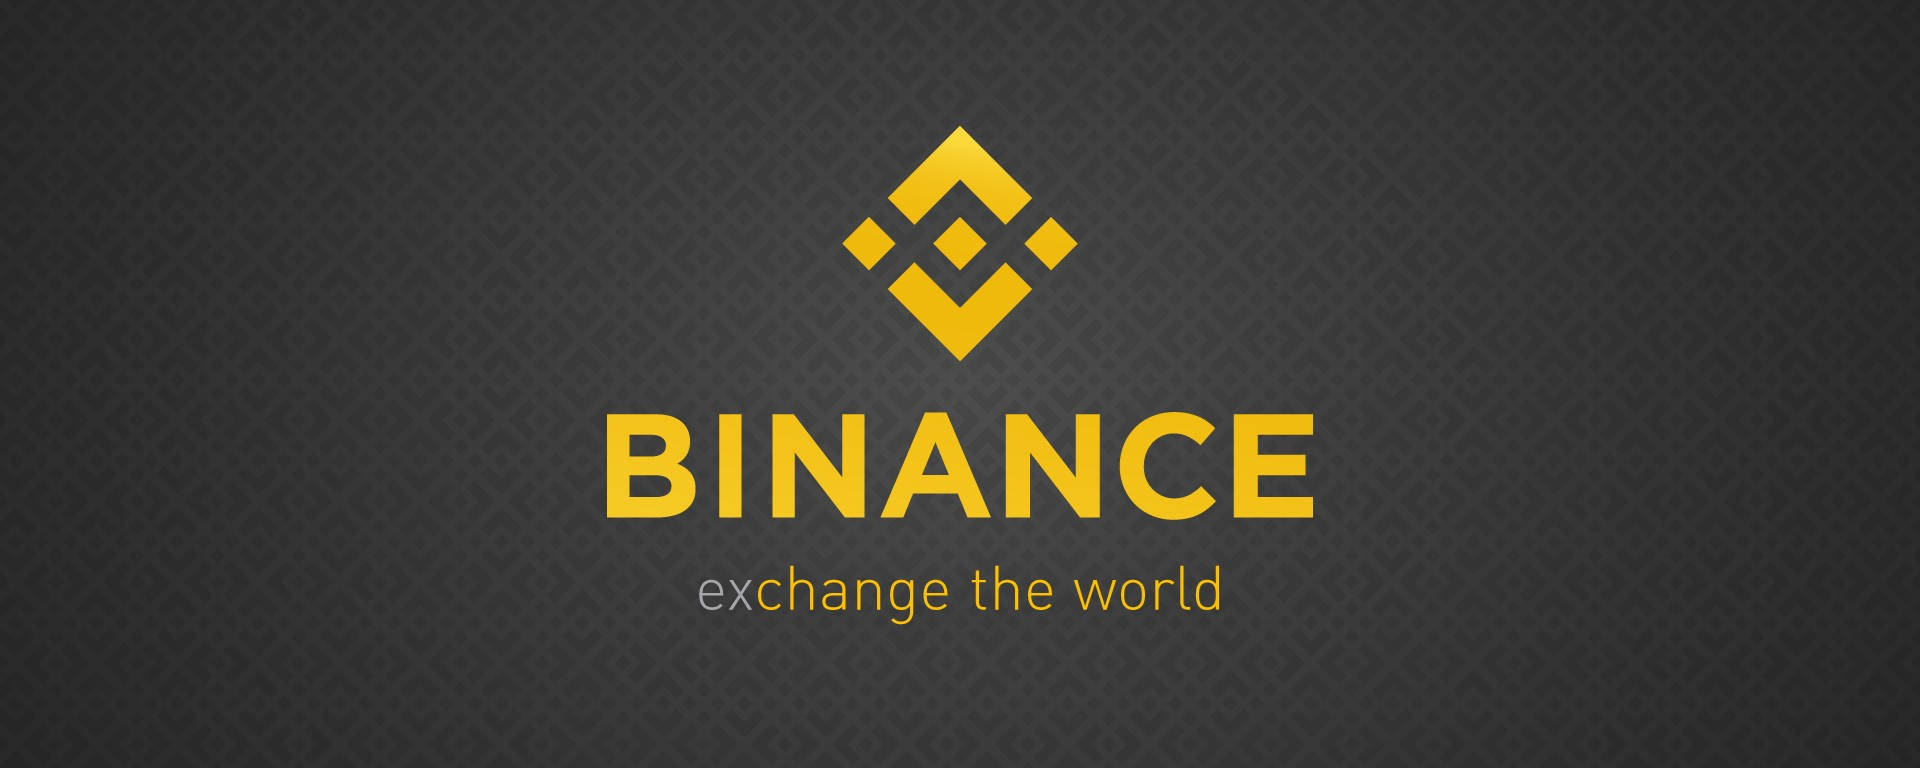 Binance Pictures